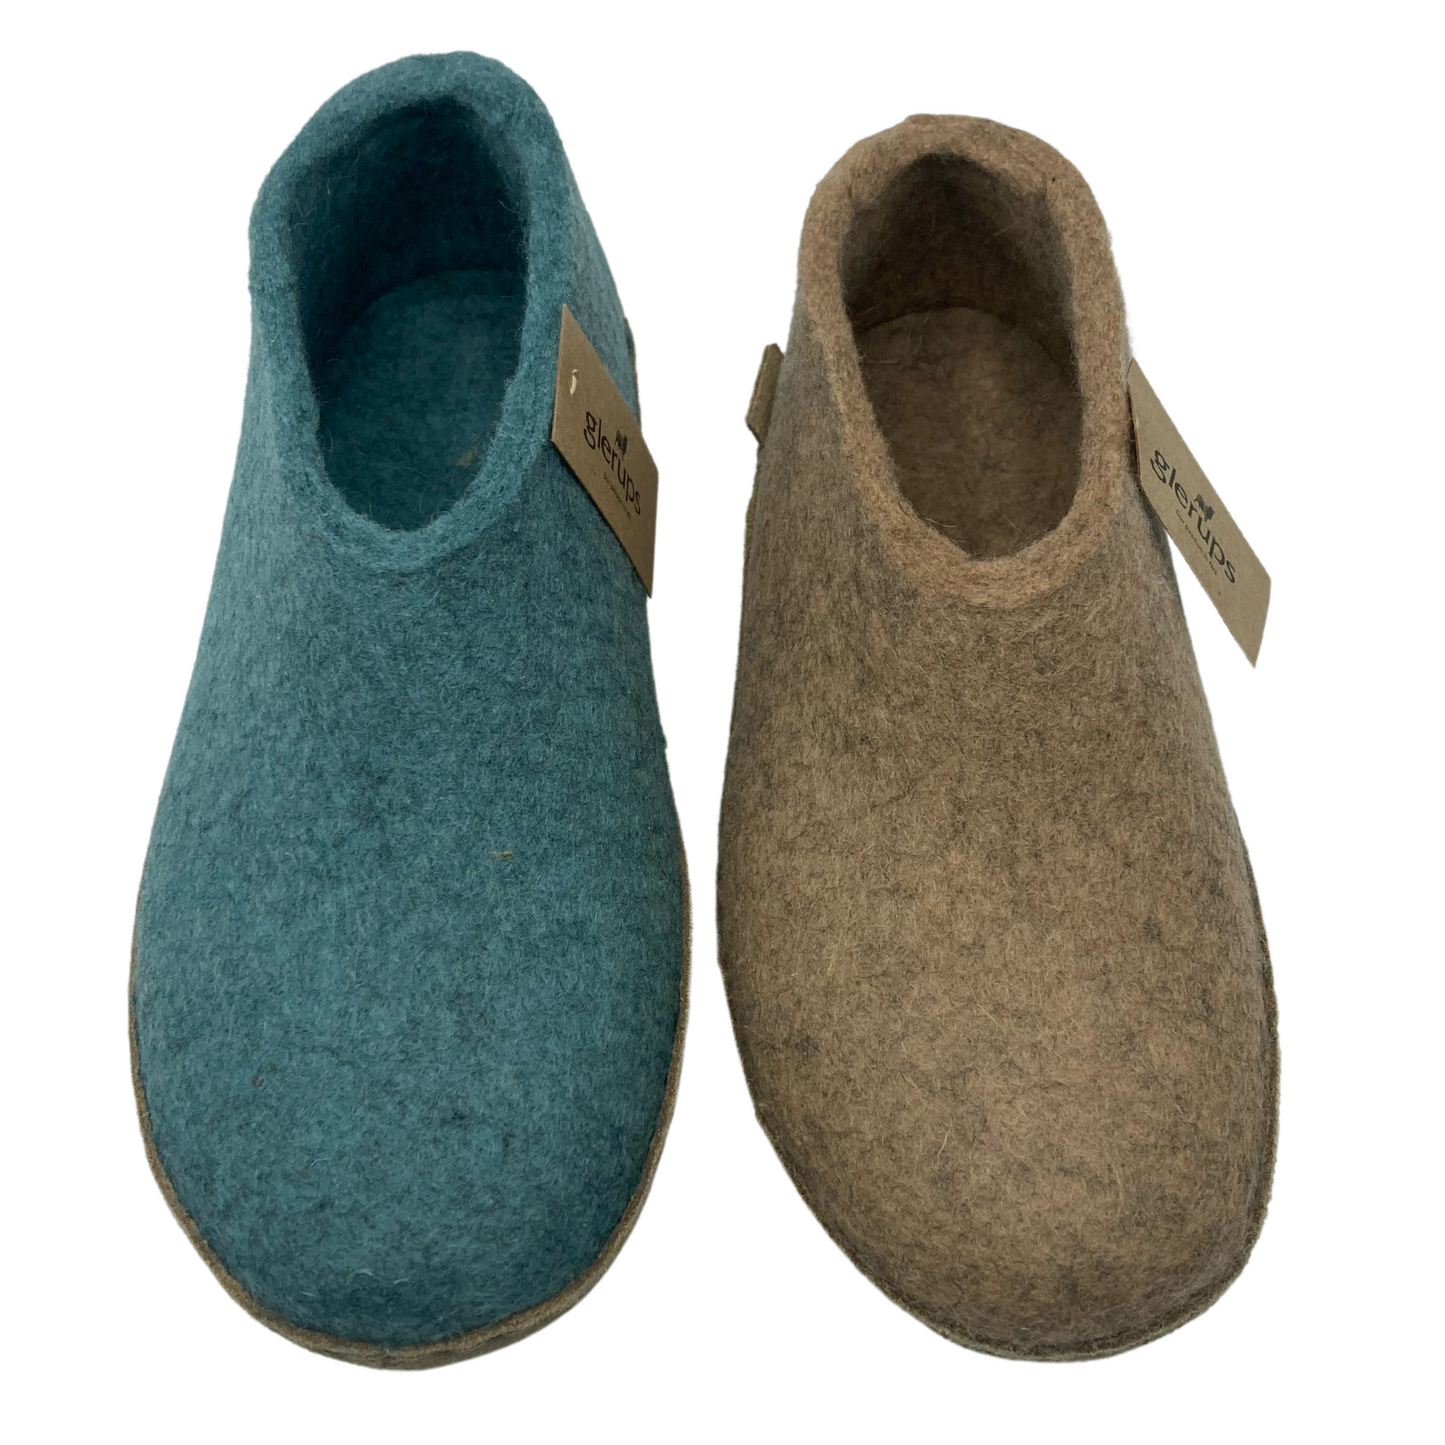 Top view of two felted wool shoes. One is teal blue and the other is beige